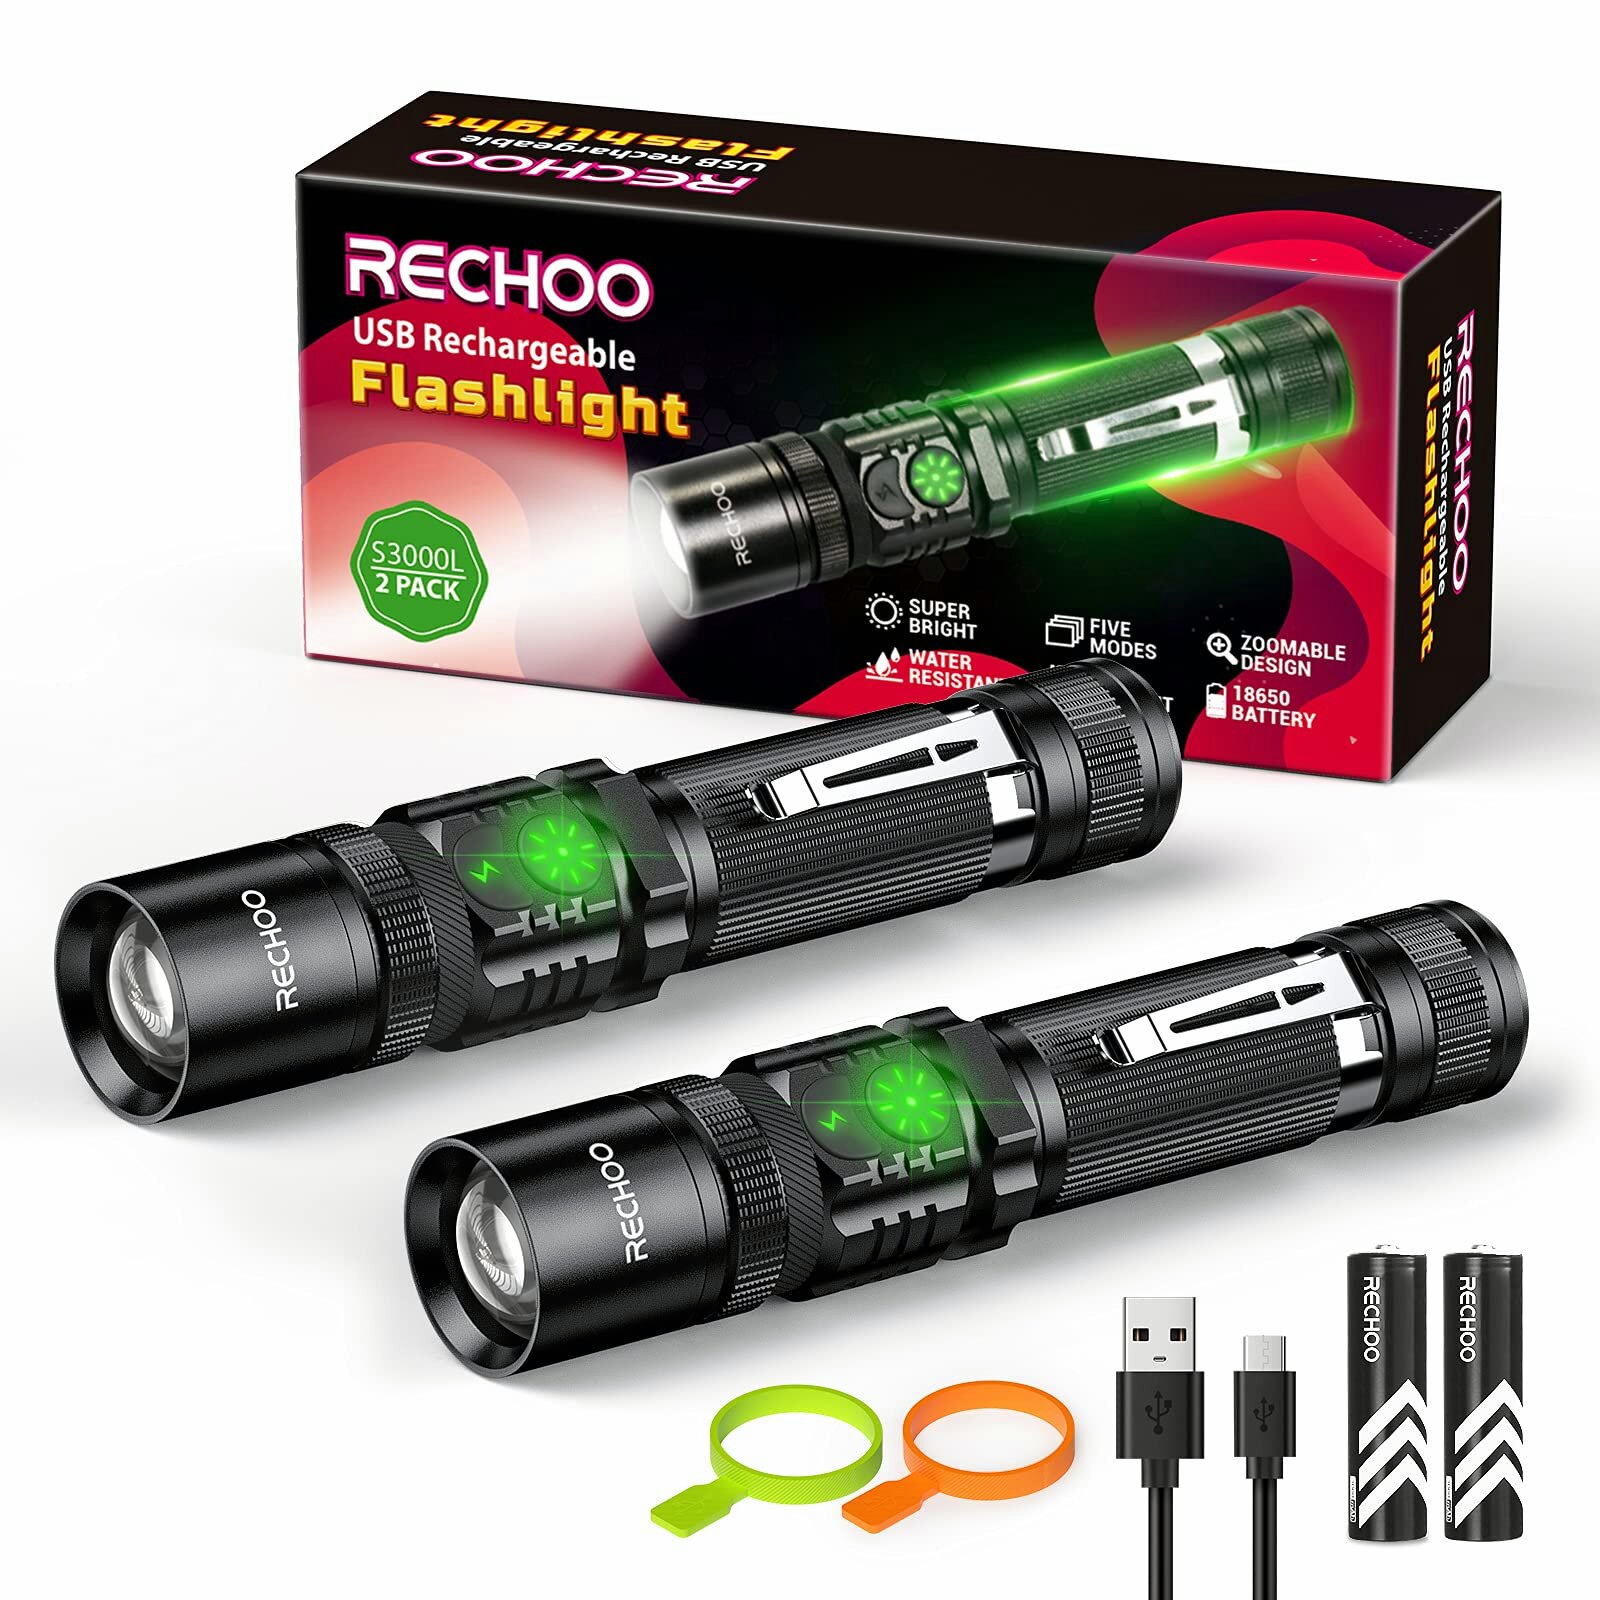 Everyday Flashlights Emergency Zoomable Best Camping LETMY Tactical Flashlight 5 Modes 4 PACK - High Lumens Hiking Waterproof Handheld LED Torch Flashlight